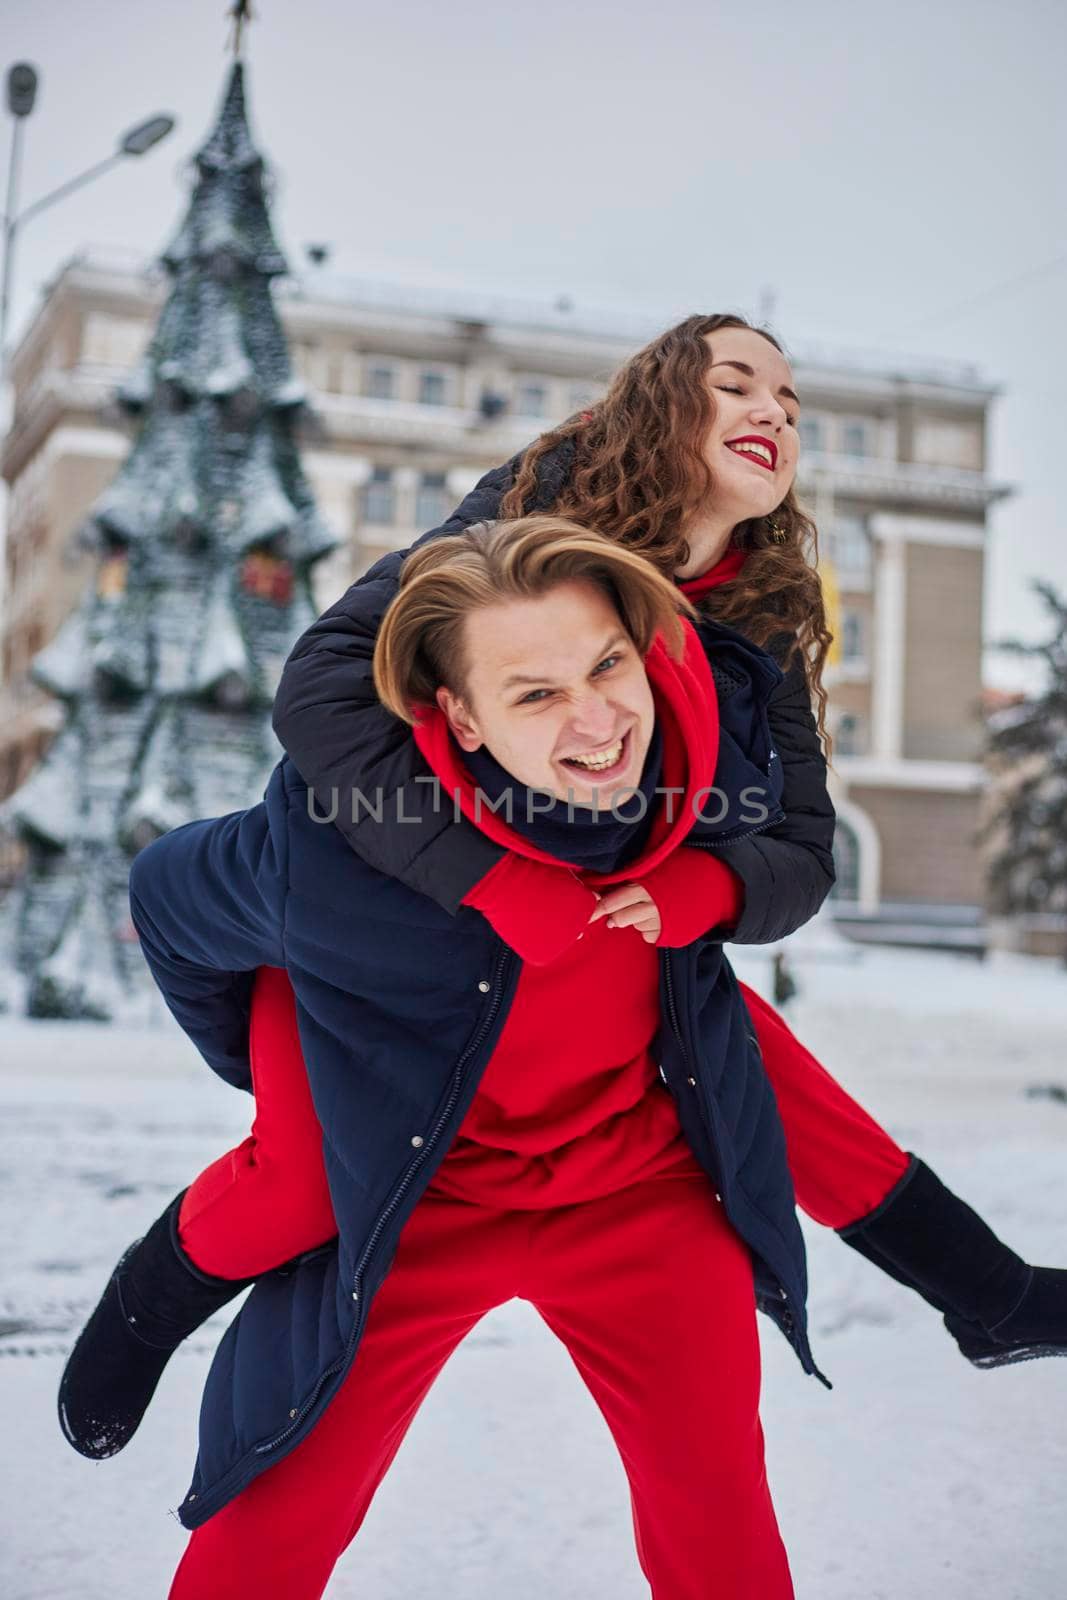 young family guy and girl spend the day in the park on a snowy day. Emotional young couple having fun while walking in the winter city, a lively man hugs his laughing beautiful woman